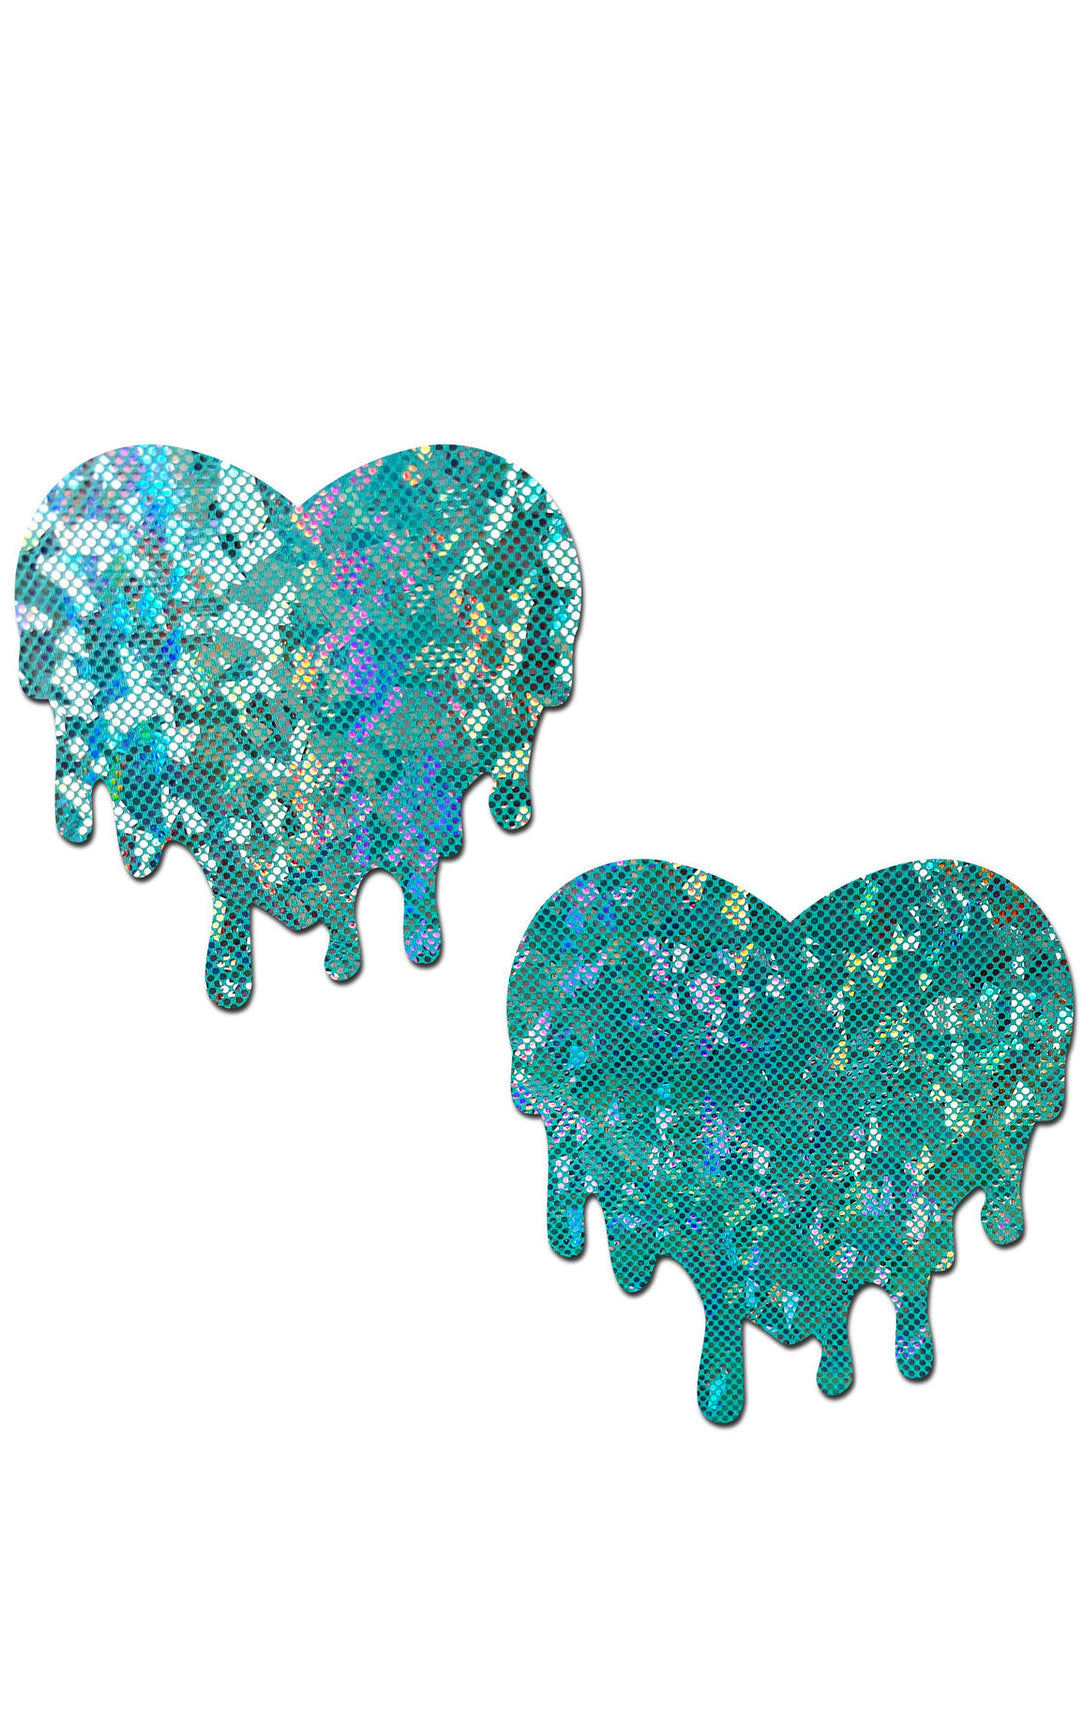 Pastease: Shattered Glass Disco Ball Seafoam Melty Heart Pasties